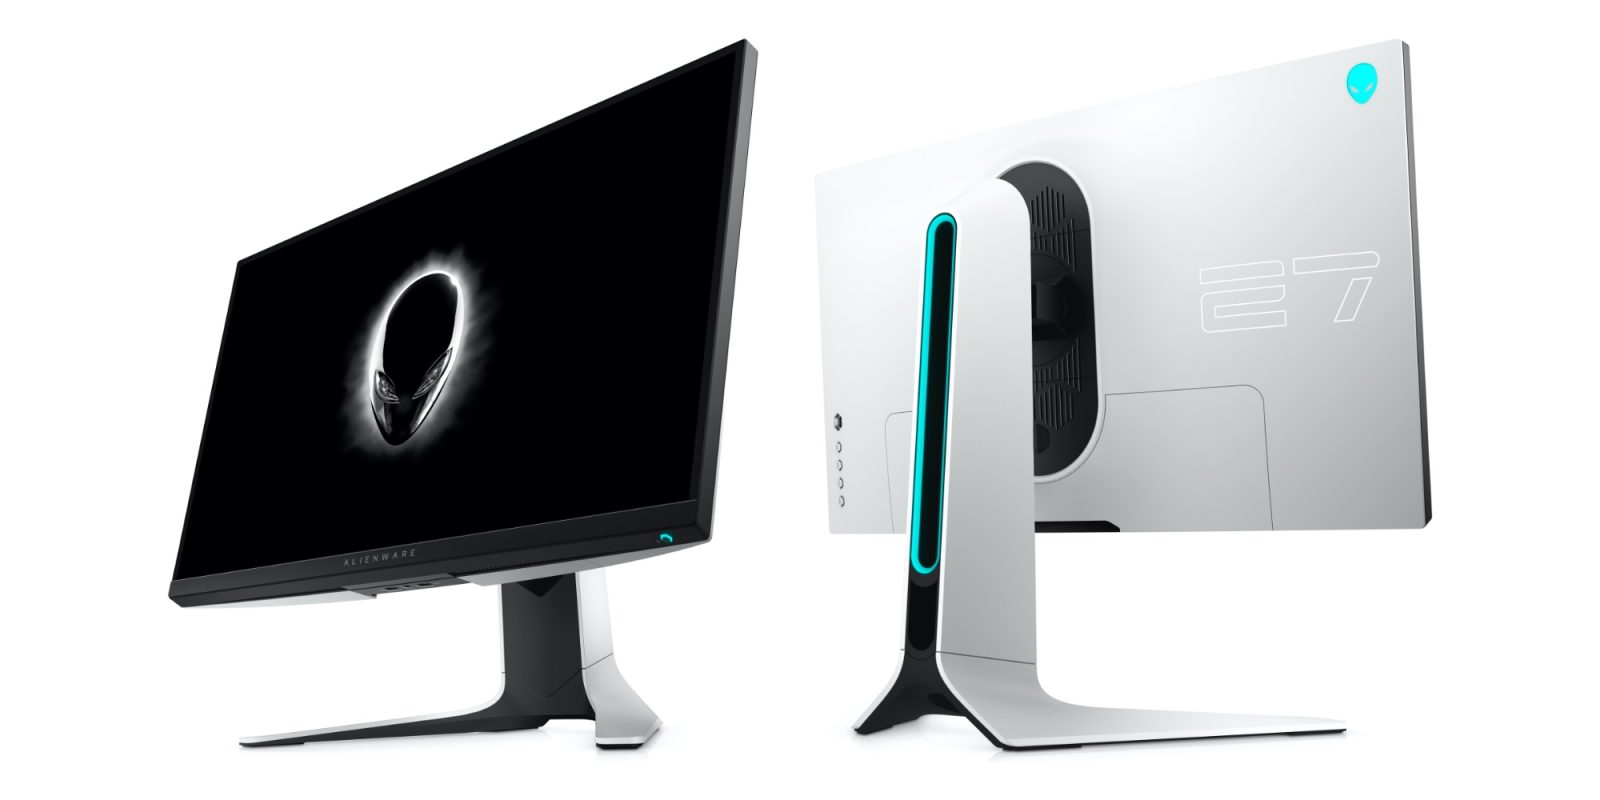 Alienware's 27-inch 240Hz Gaming Monitor drops to $350 ($100 off), more